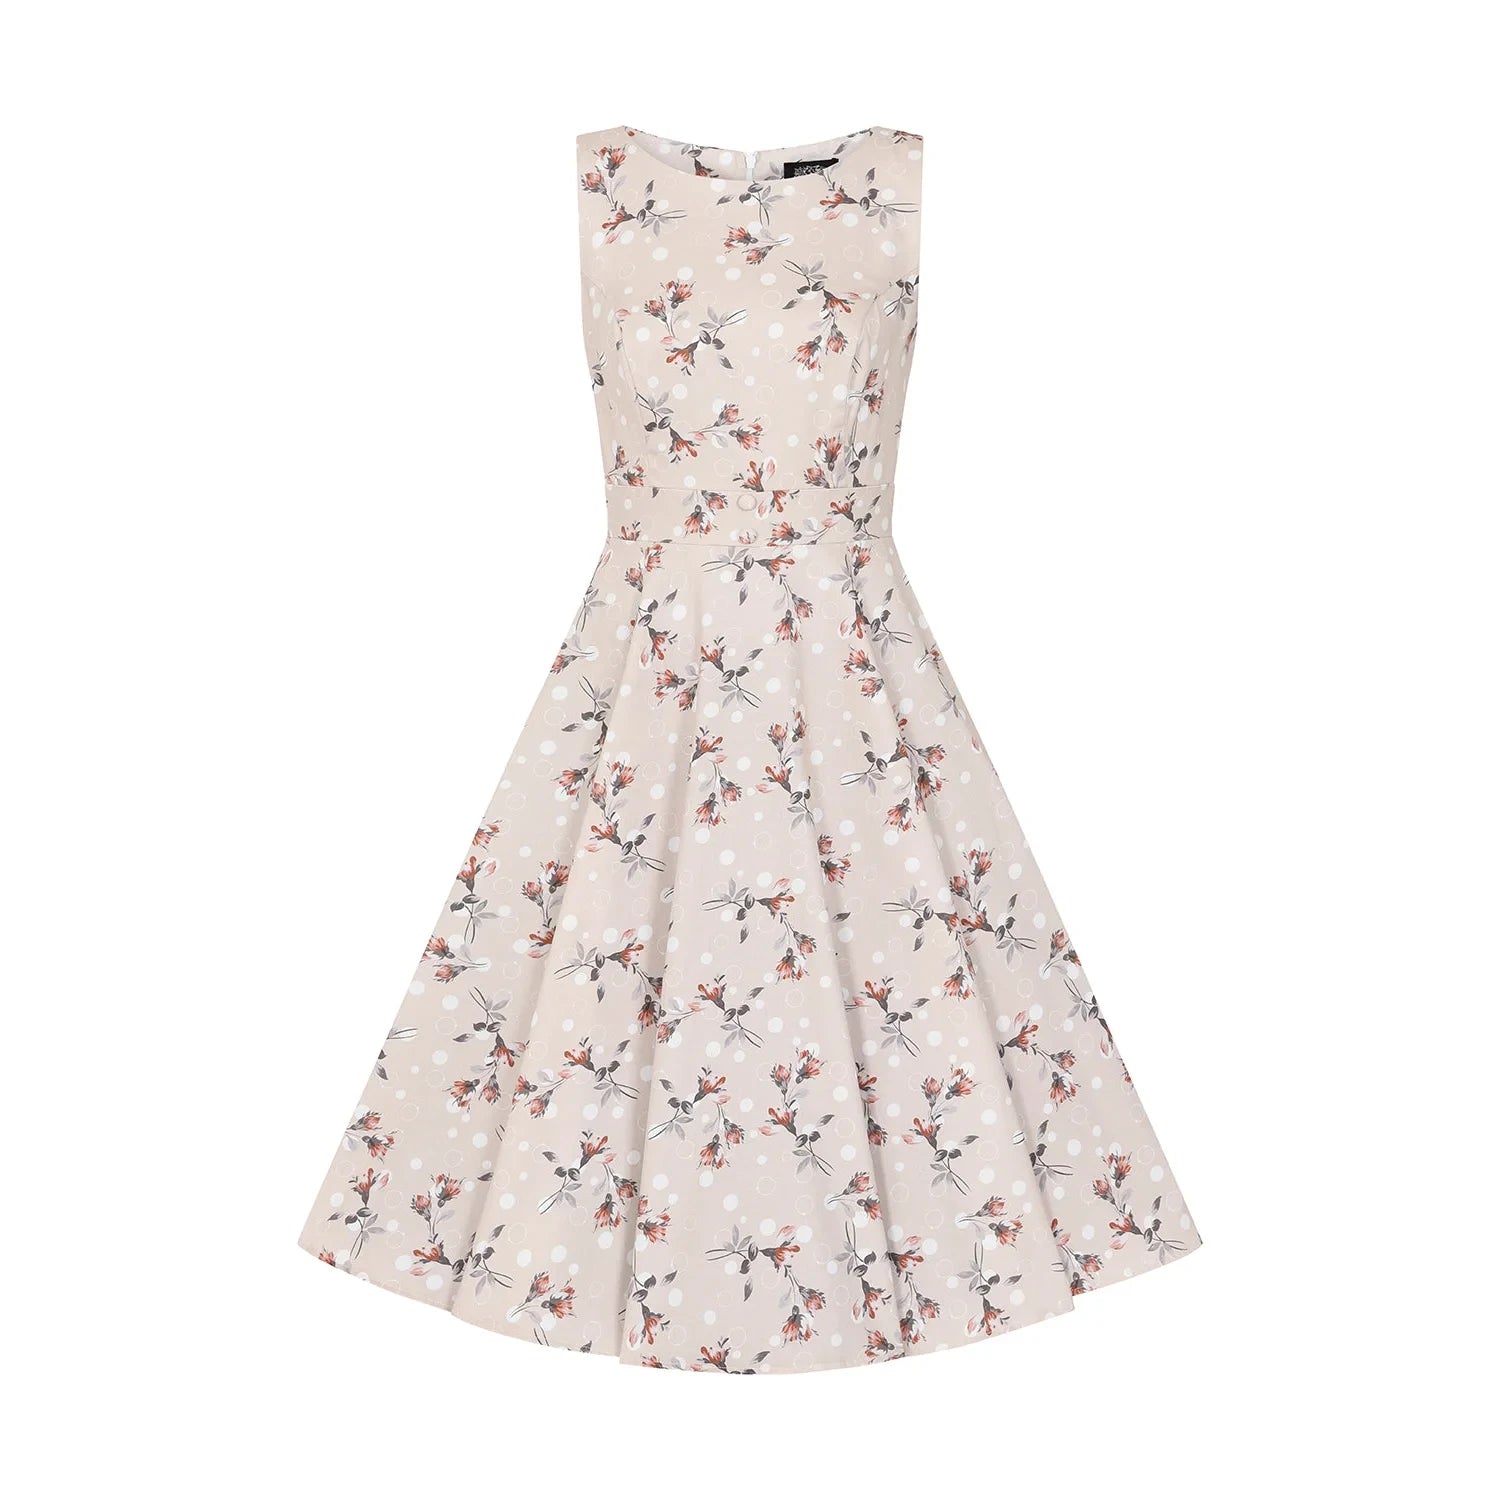 Pale Pink Polka Dot and Floral Sleeveless Swing Tea Dress